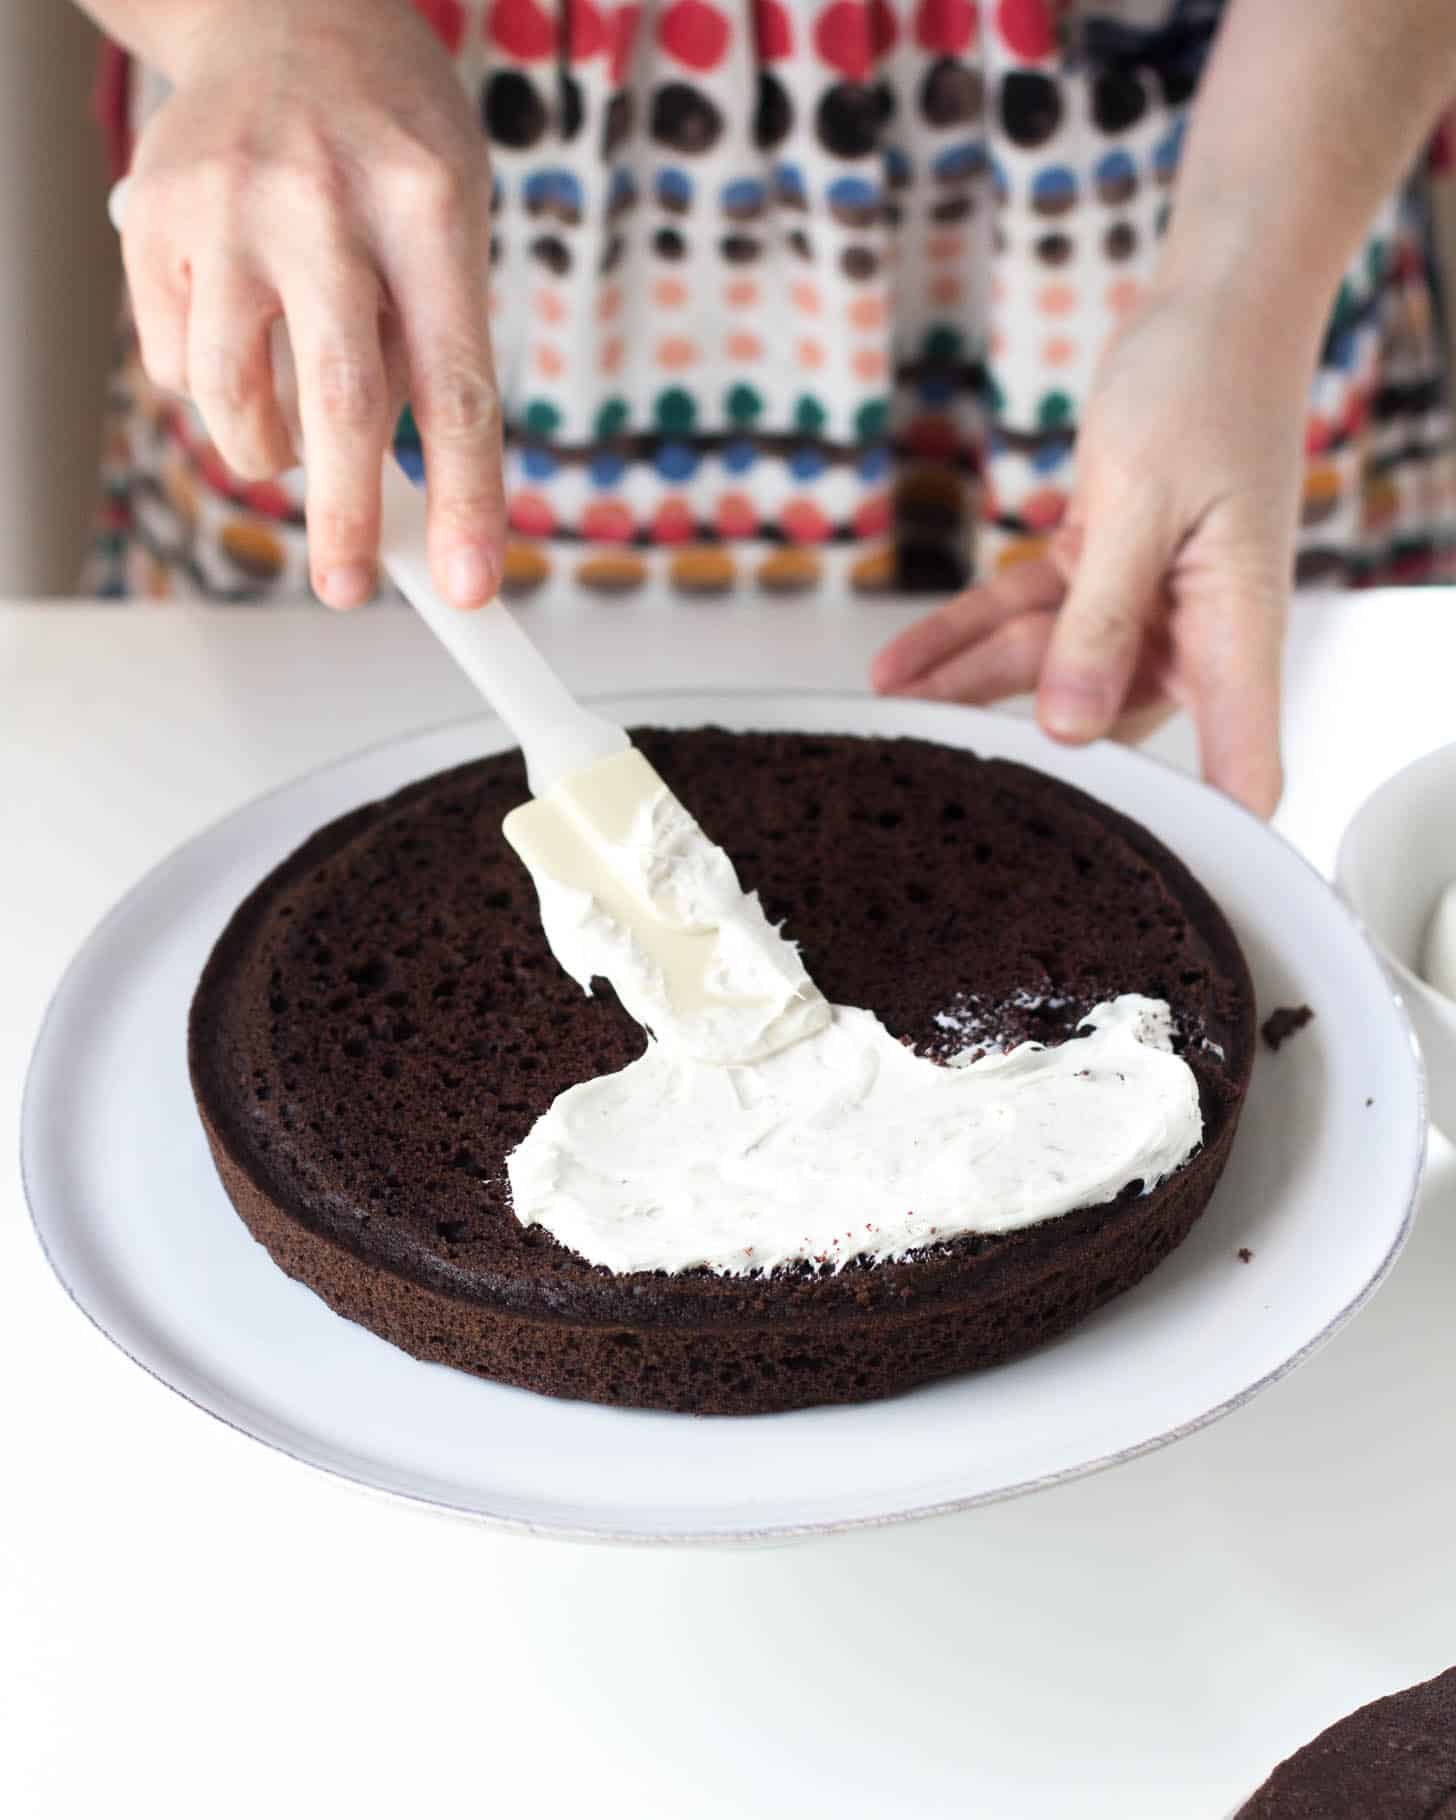 spreading frosting on a chocolate cake